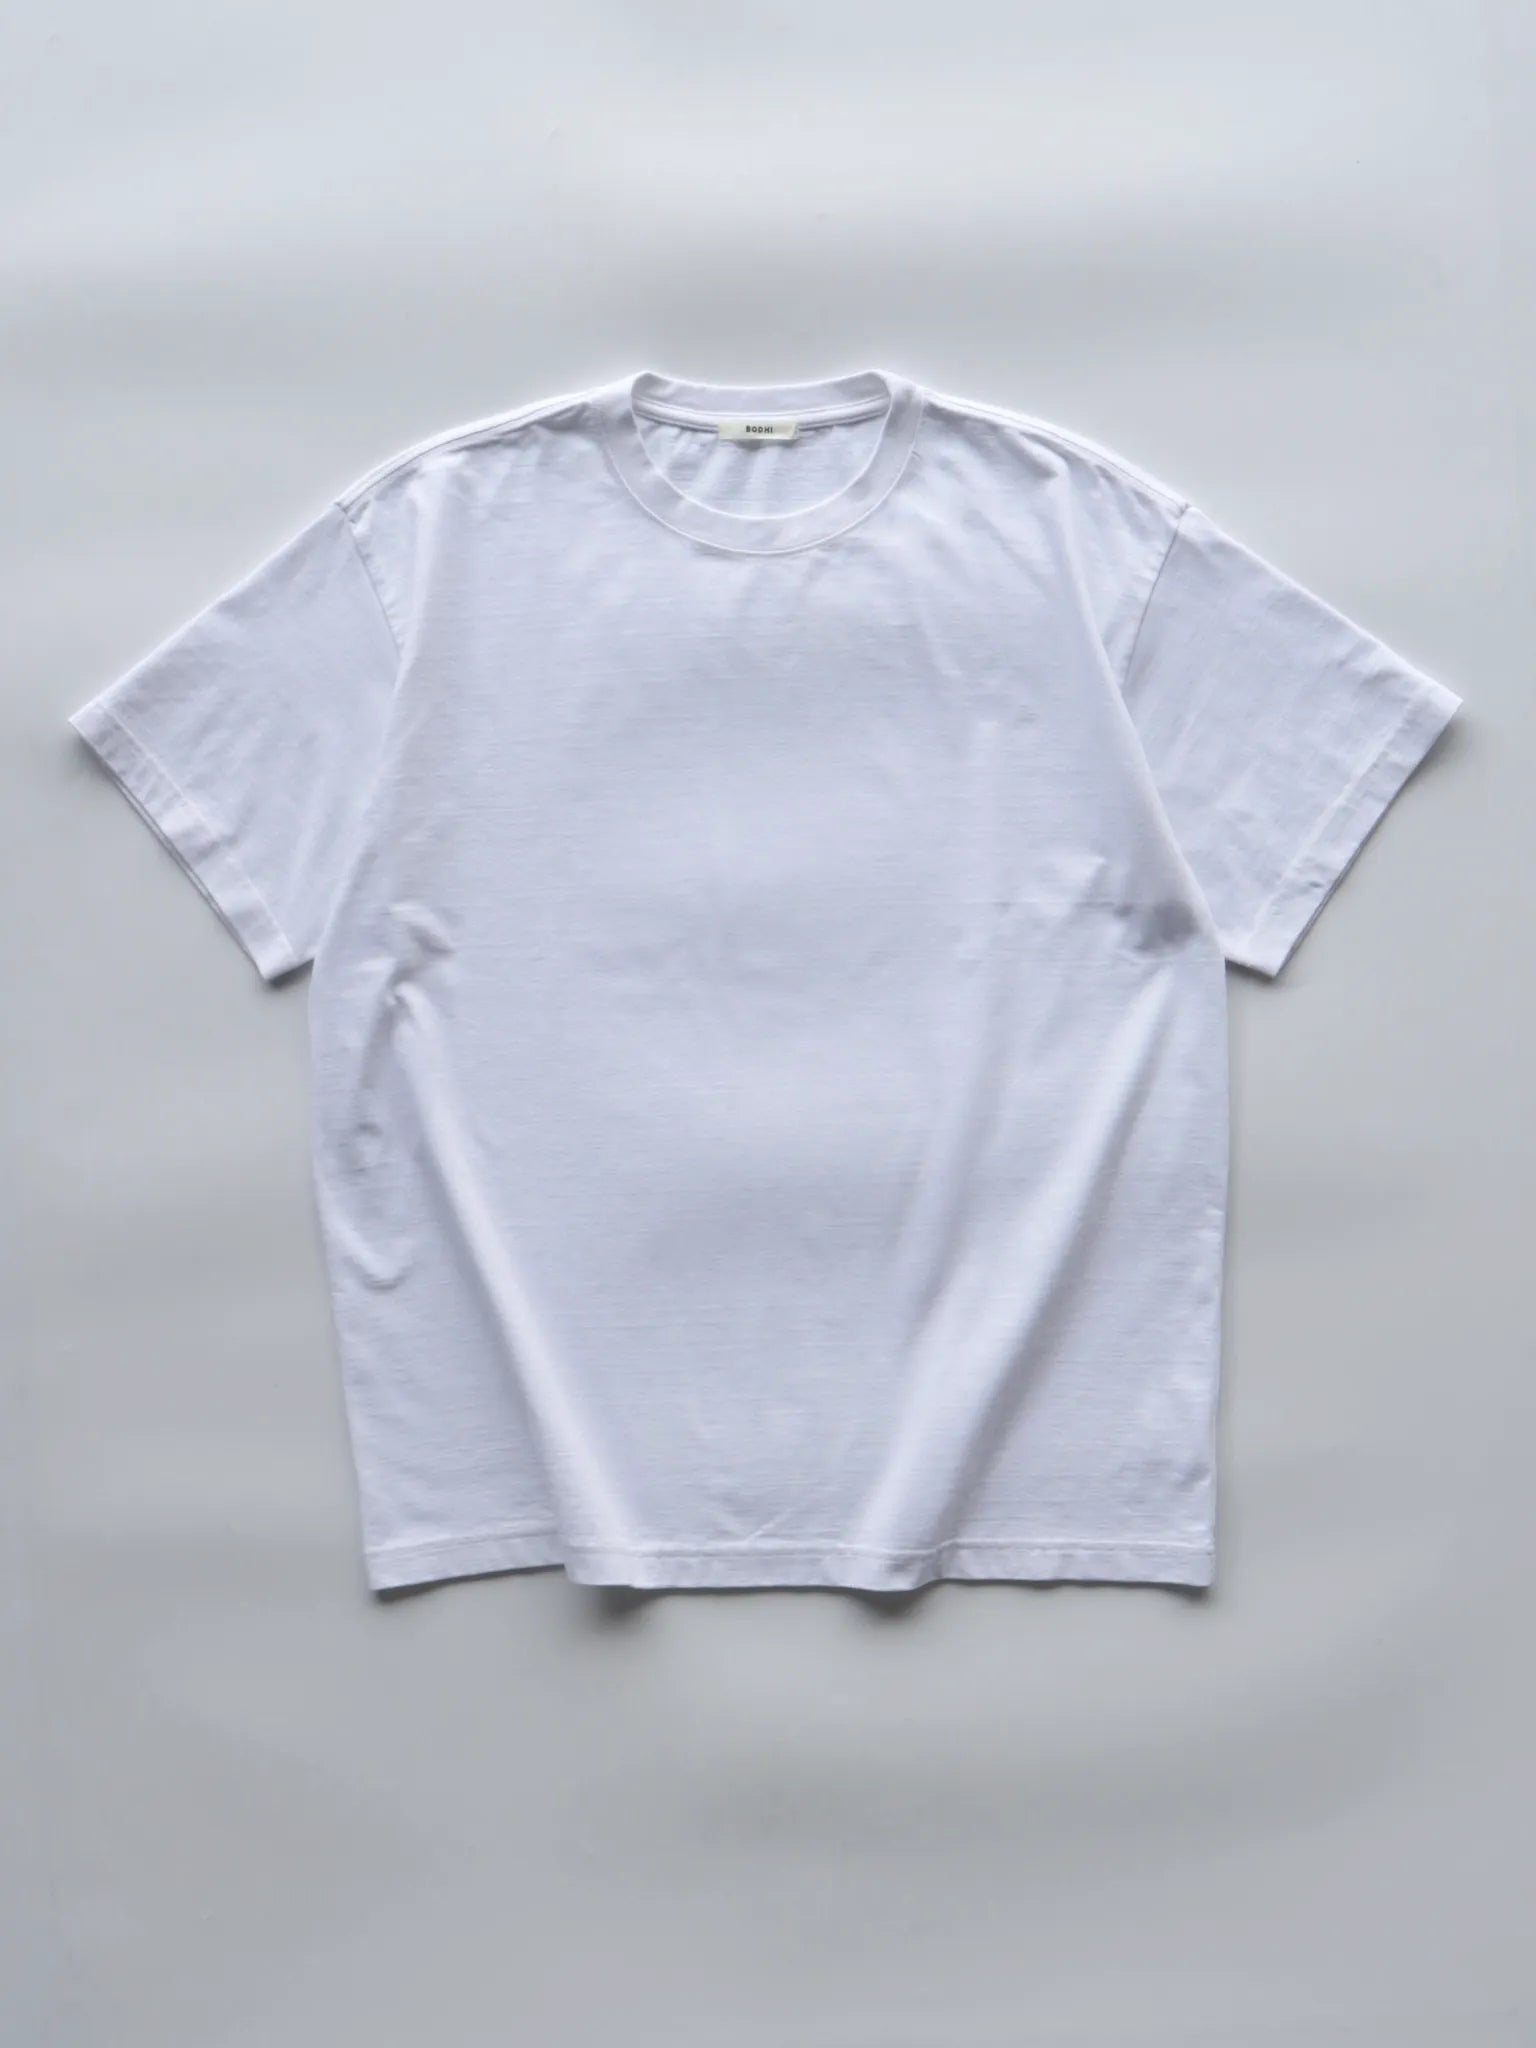 bodhi-middleweight-cotton-cashmere-tee-white-1